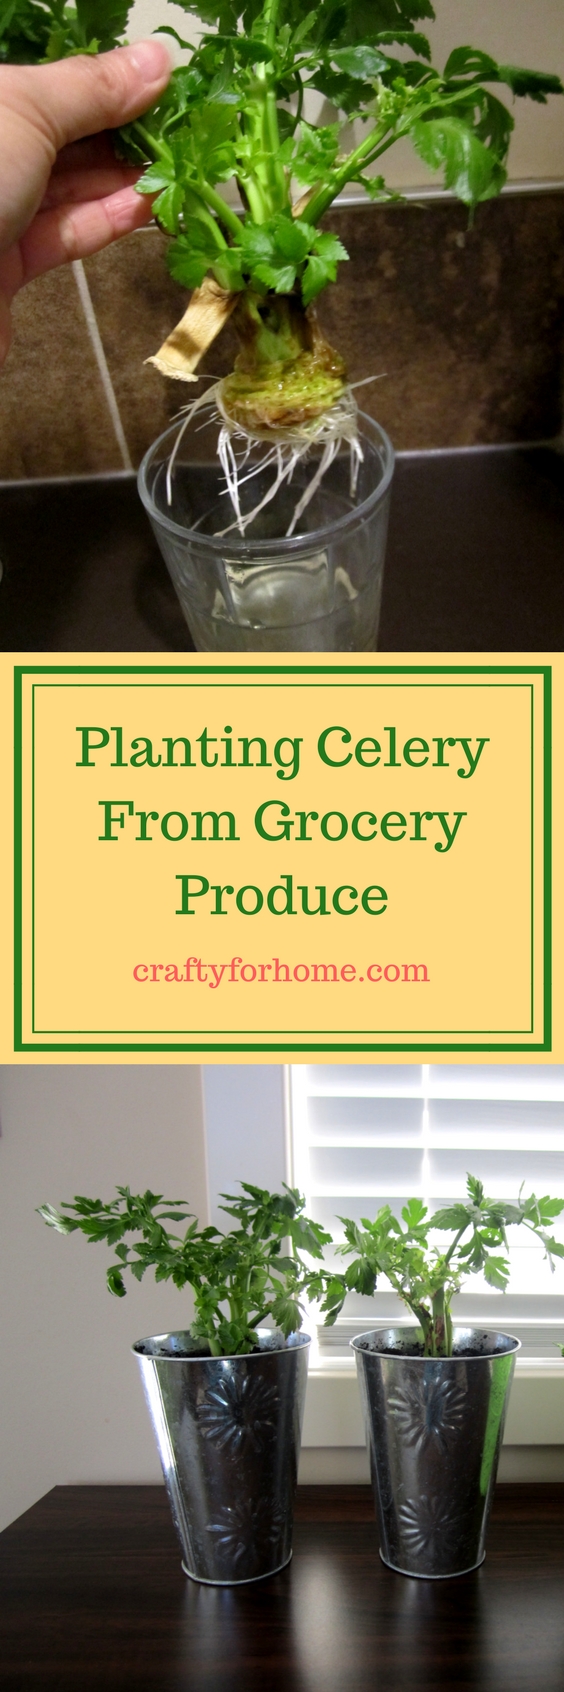 Planting Celery From Grocery Produce